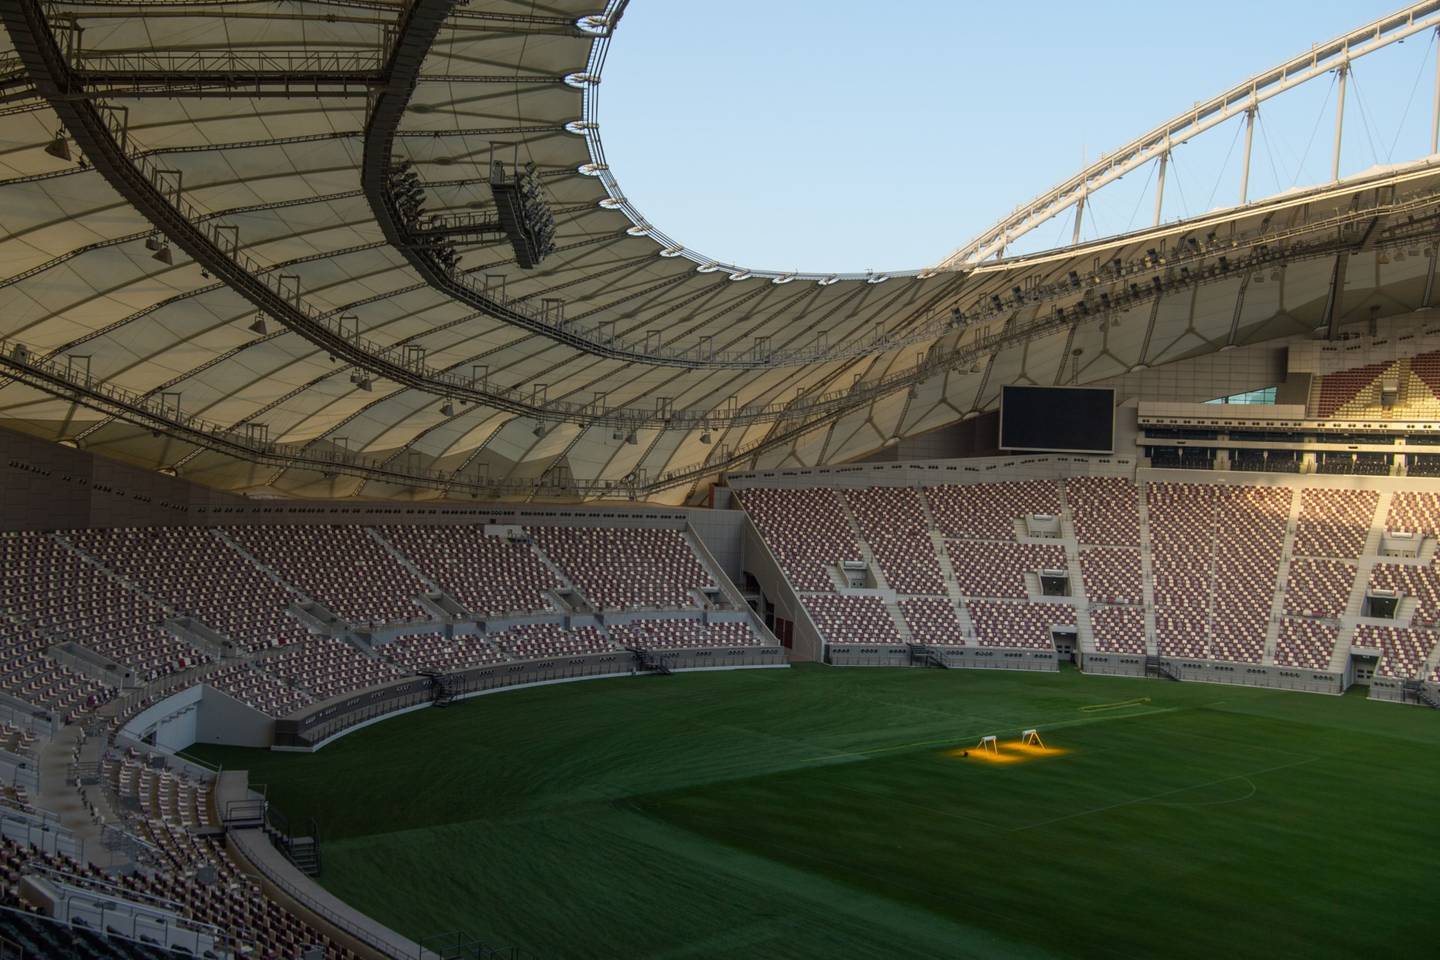 A general view of the inside of the Khalifa International stadium ahead of the FIFA World Cup Qatar 2022.